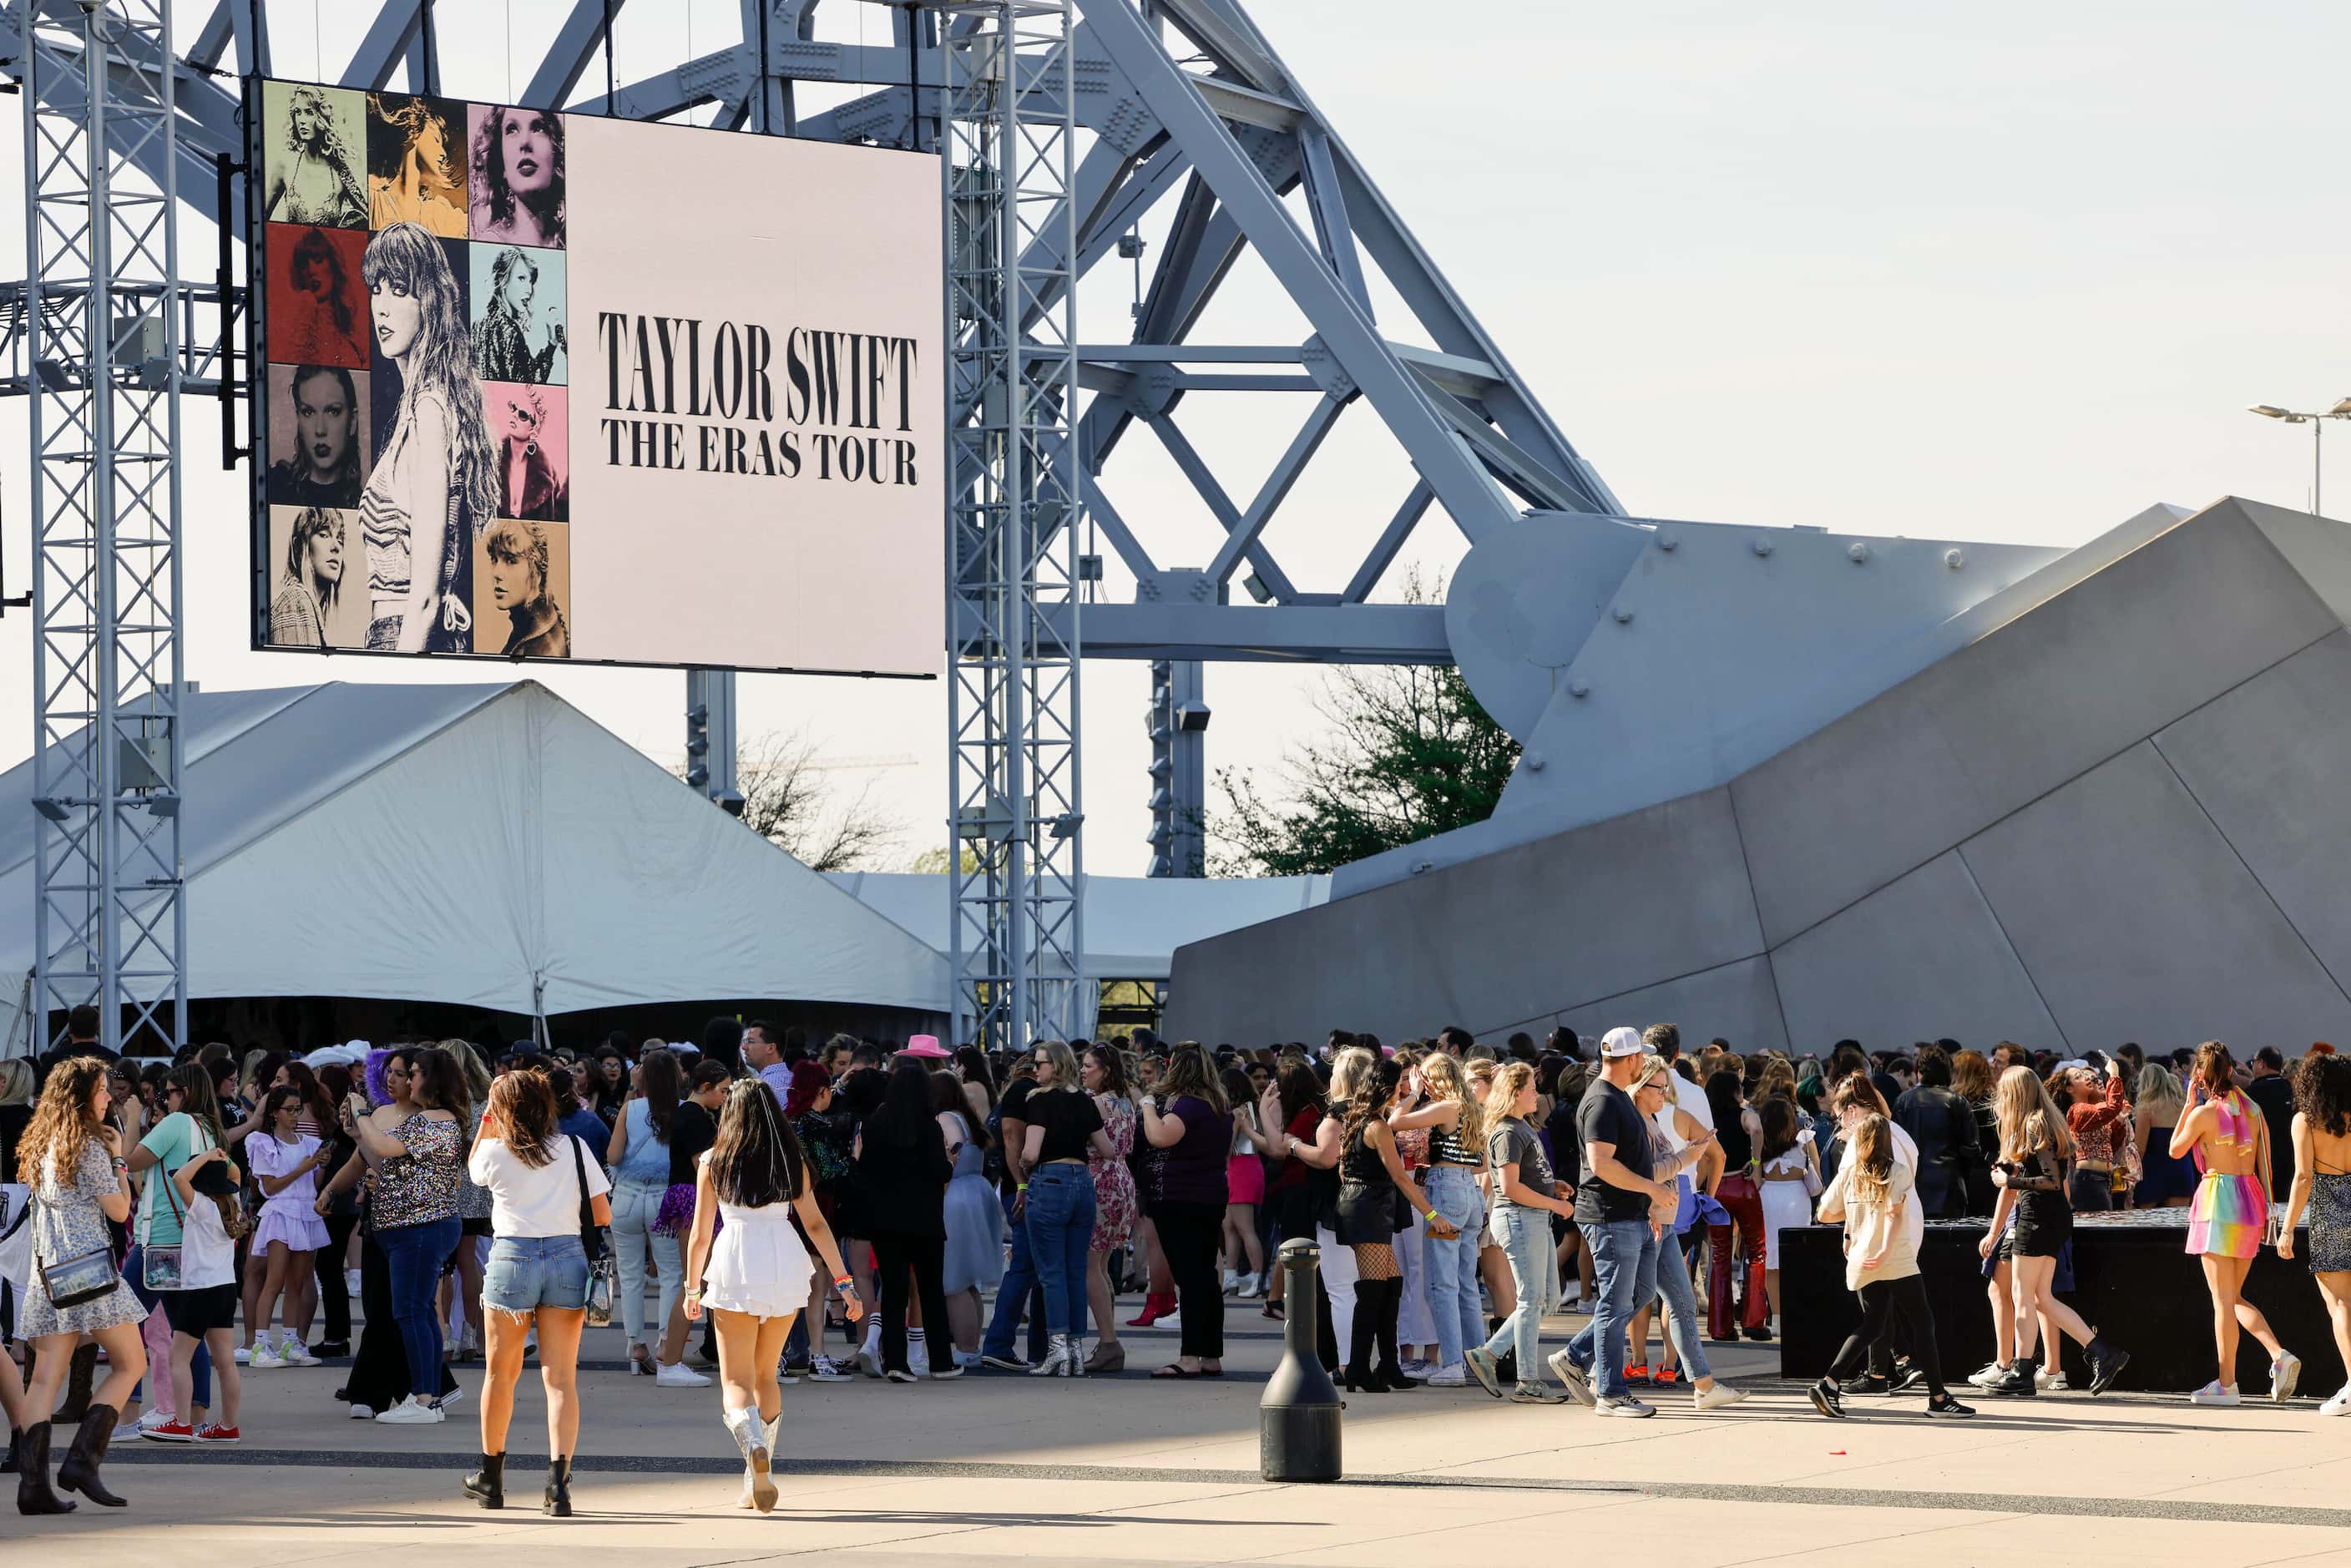 Hundreds of fans gather outside before a Taylor Swift Eras Tour concert at AT&T Stadium.